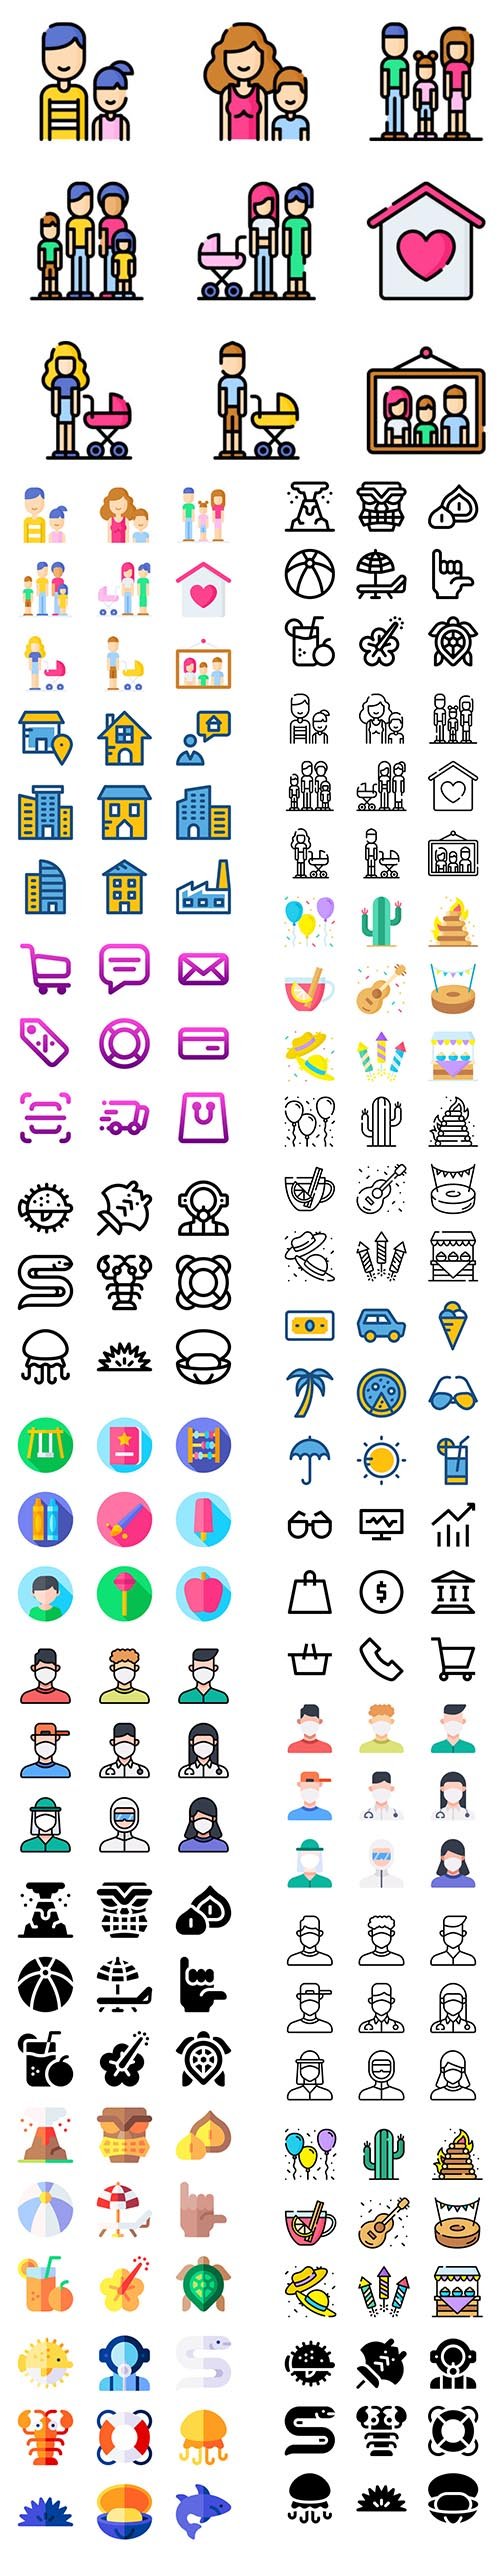 Big Icons Various Pack - More 800 Icons